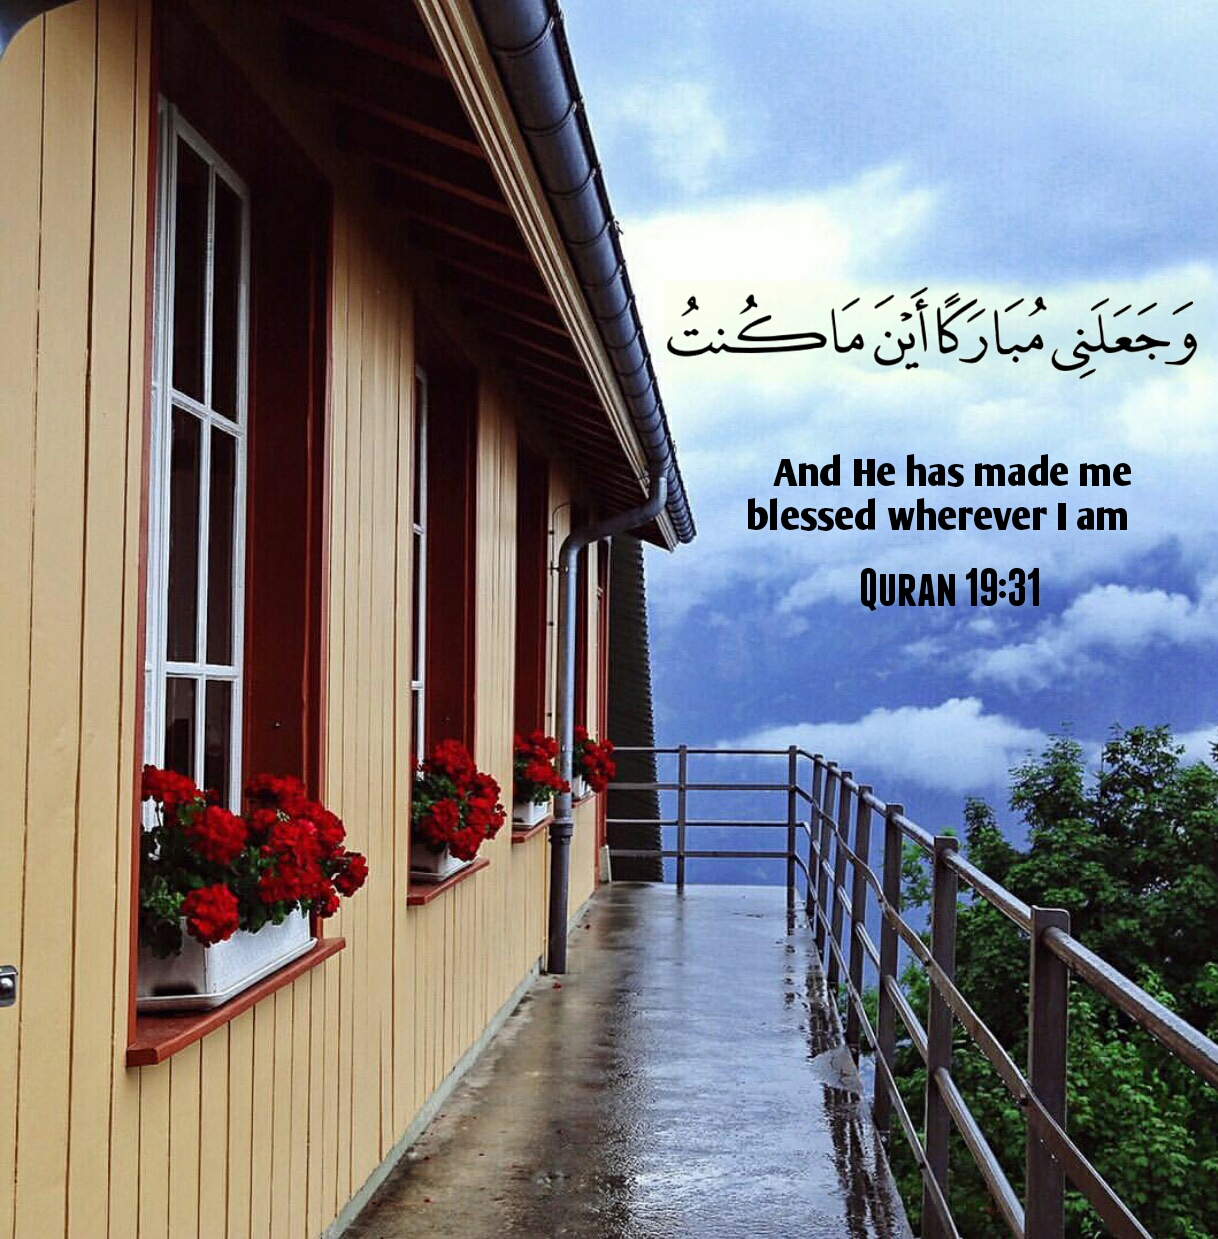 And He has made me blessed wherever I am | Surah Maryam 19:31